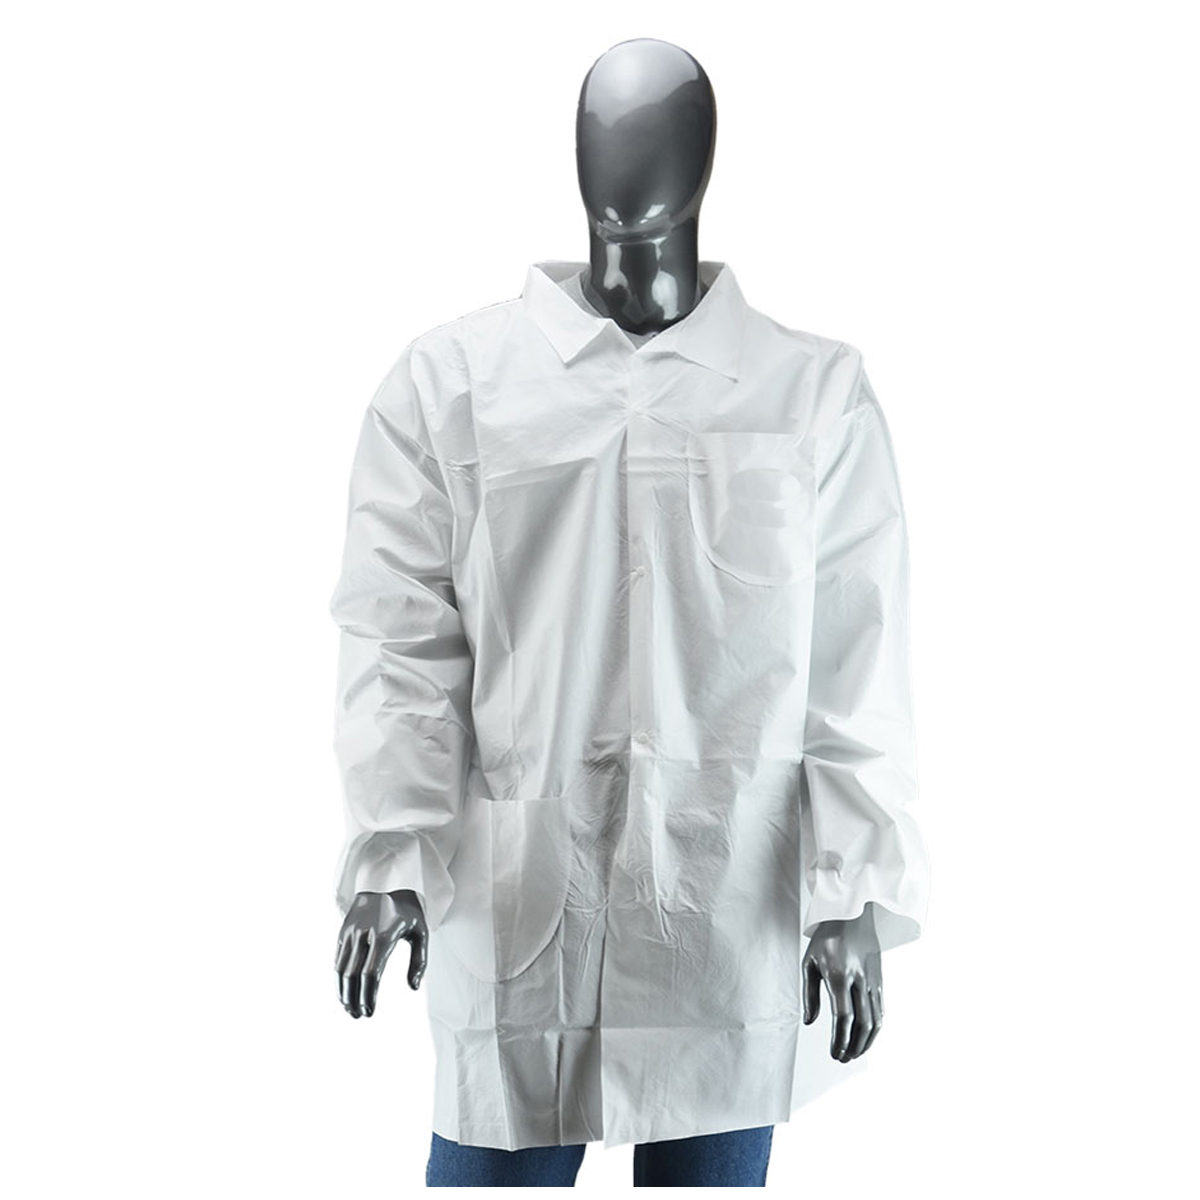 RADNOR® 2X White Polypropylene Disposable Lab Coat (Availability restrictions apply.)